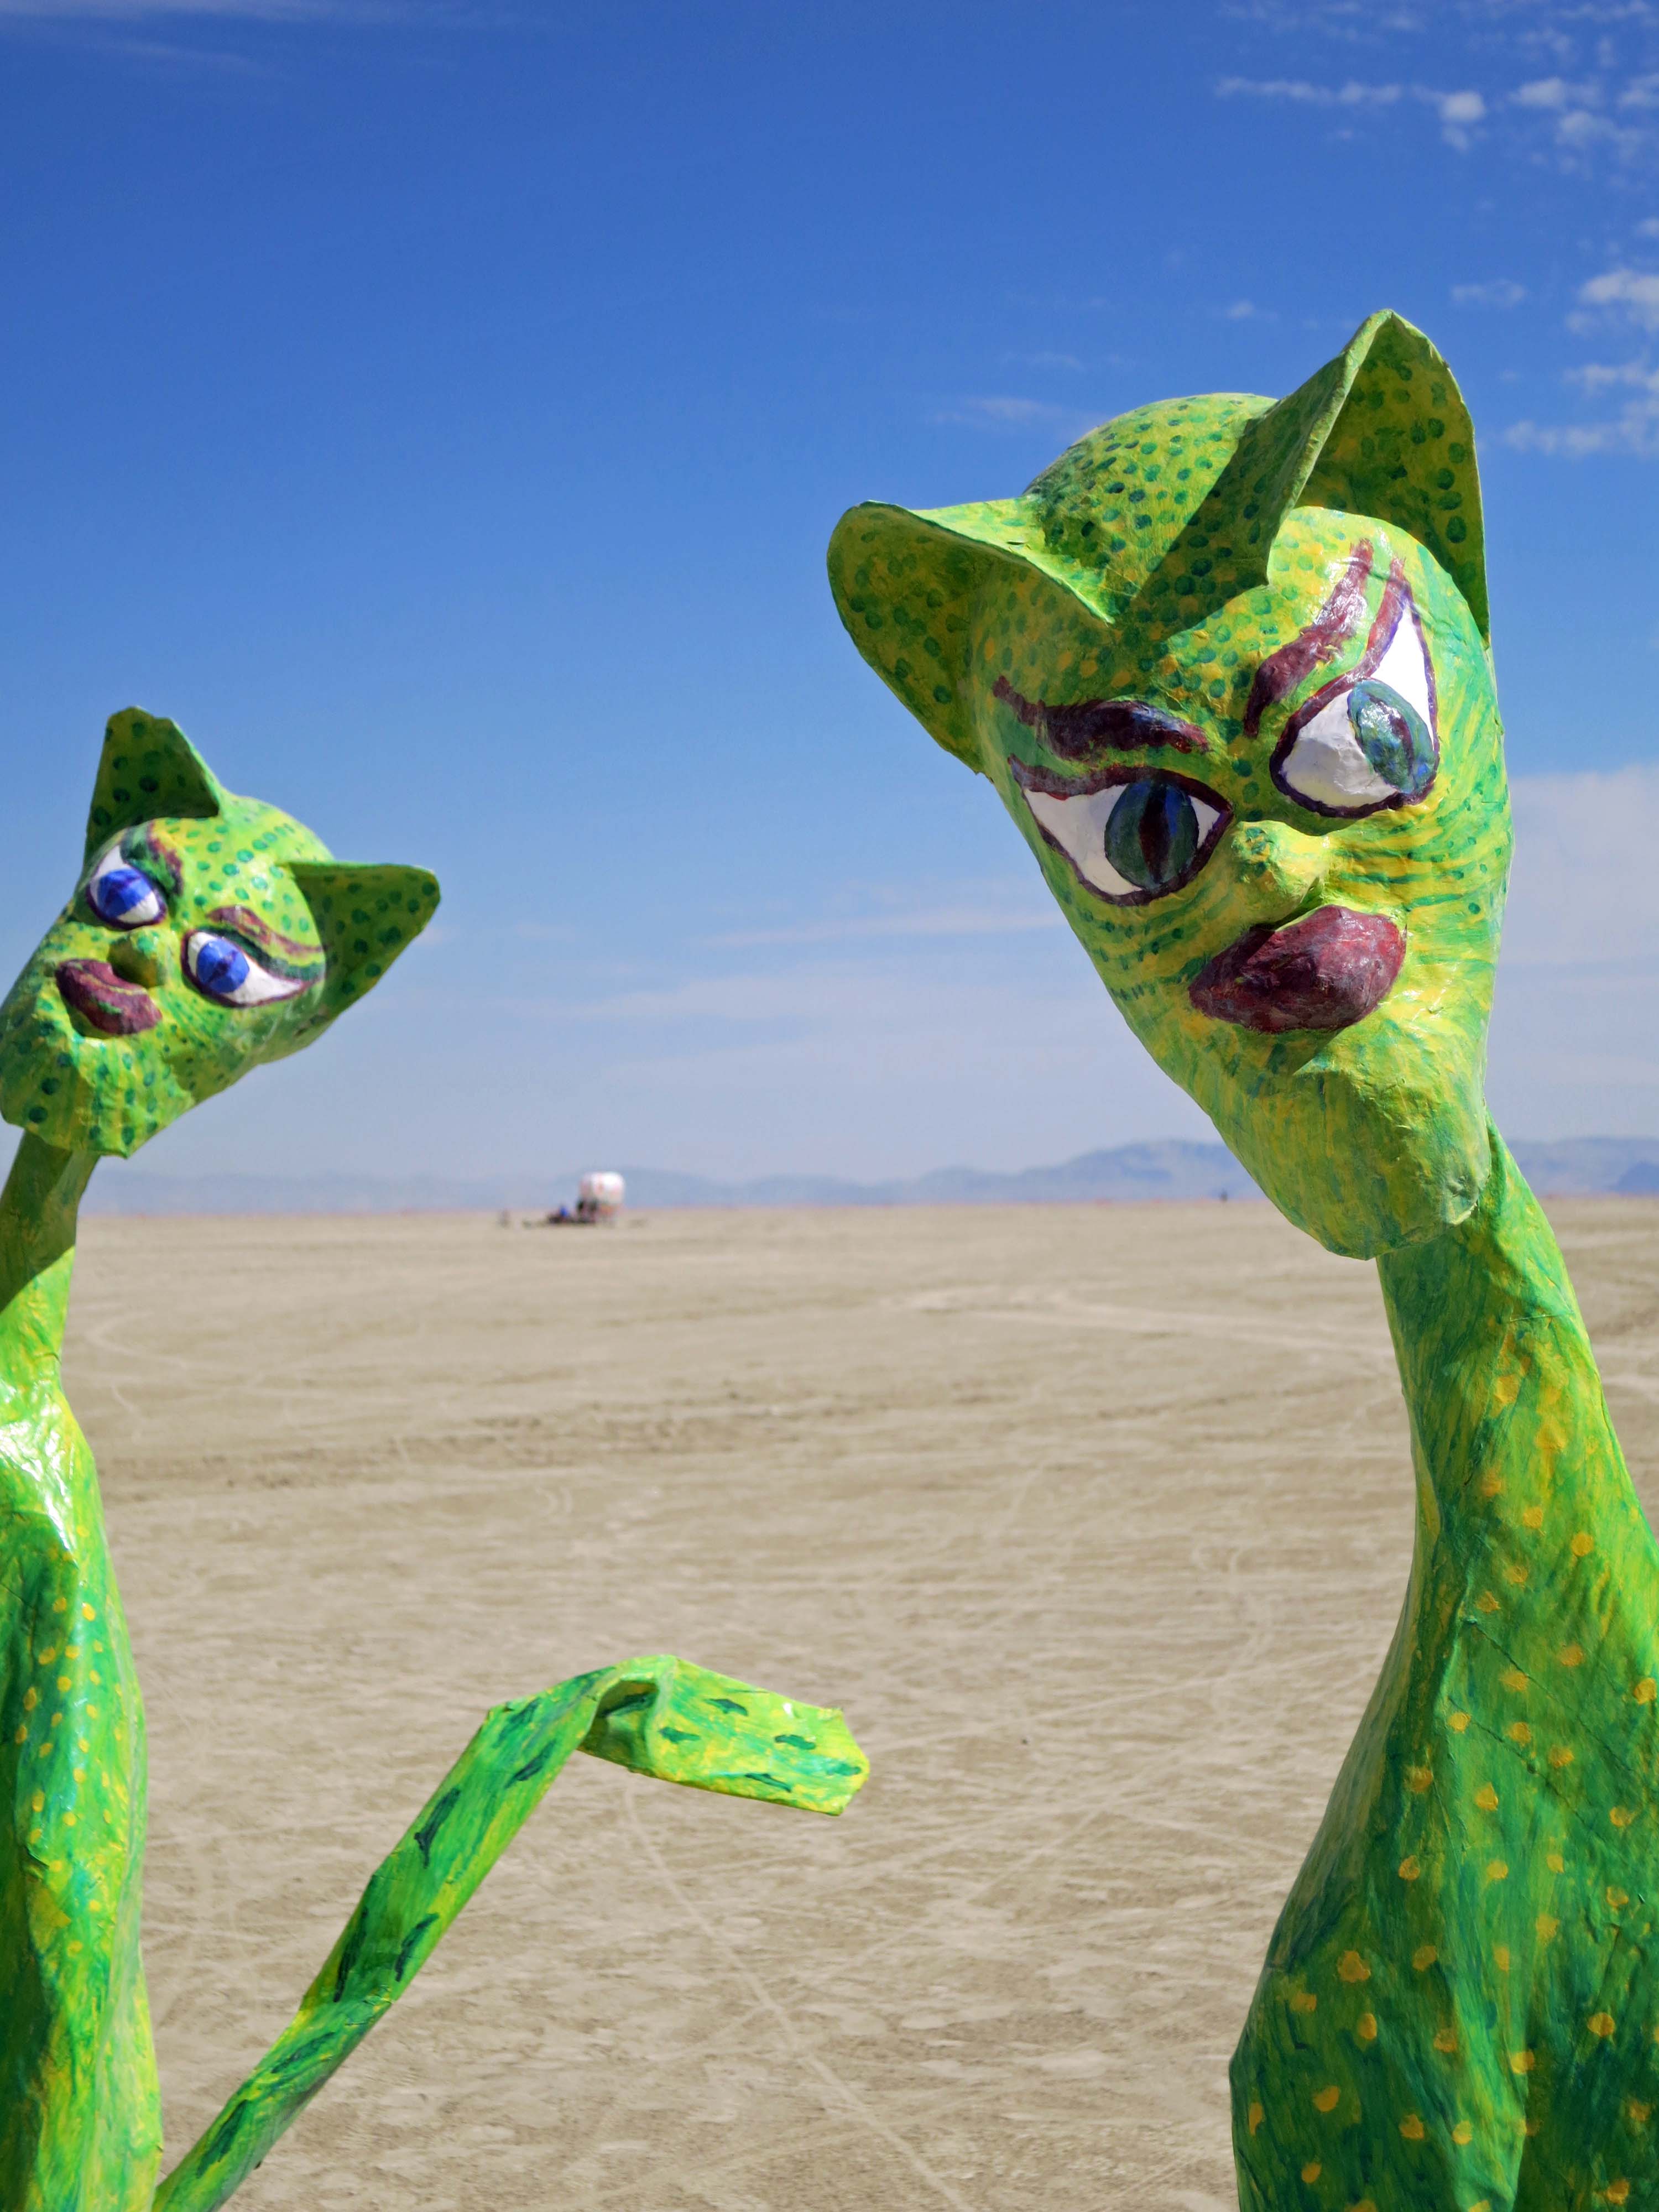 I found these cats with their unique look way out on the Playa.